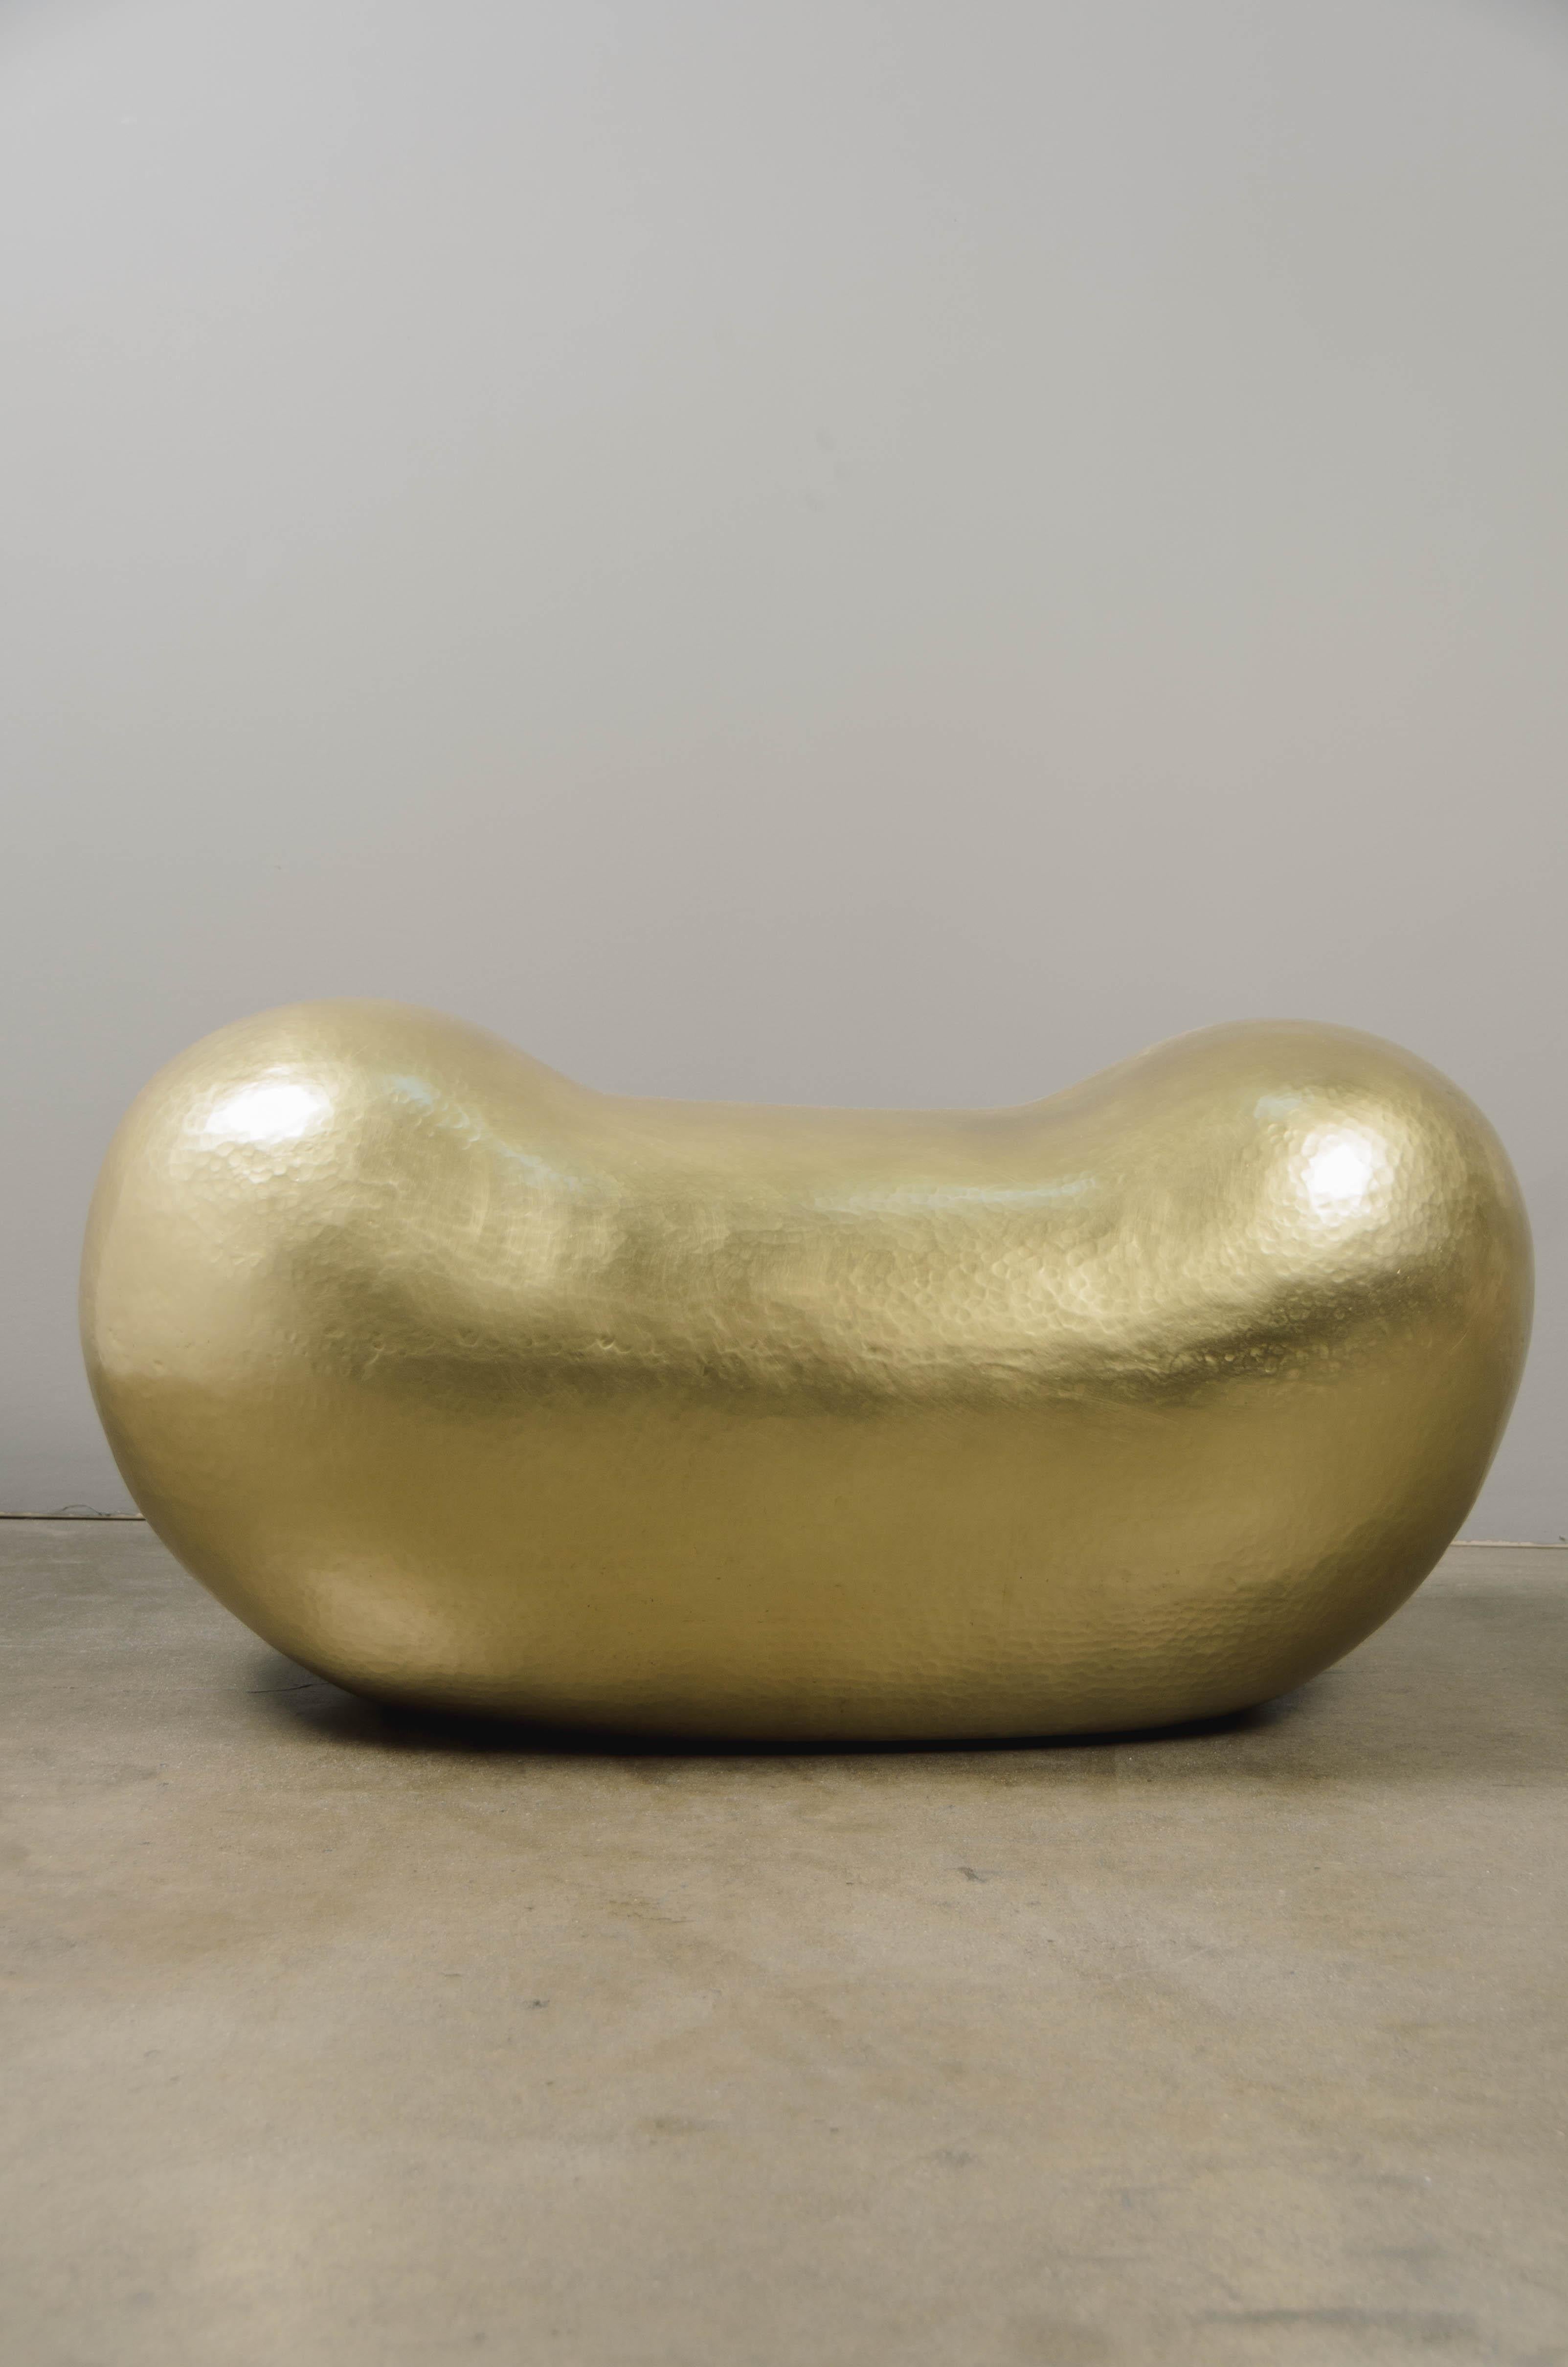 Bao Seat
Brass
Hand Repoussé
Limited Edition
Contemporary 
Repoussé is the traditional art of hand-hammering decorative relief onto sheet metal. The technique originated around 800 BC between Asia and Europe and in Chinese historical context,